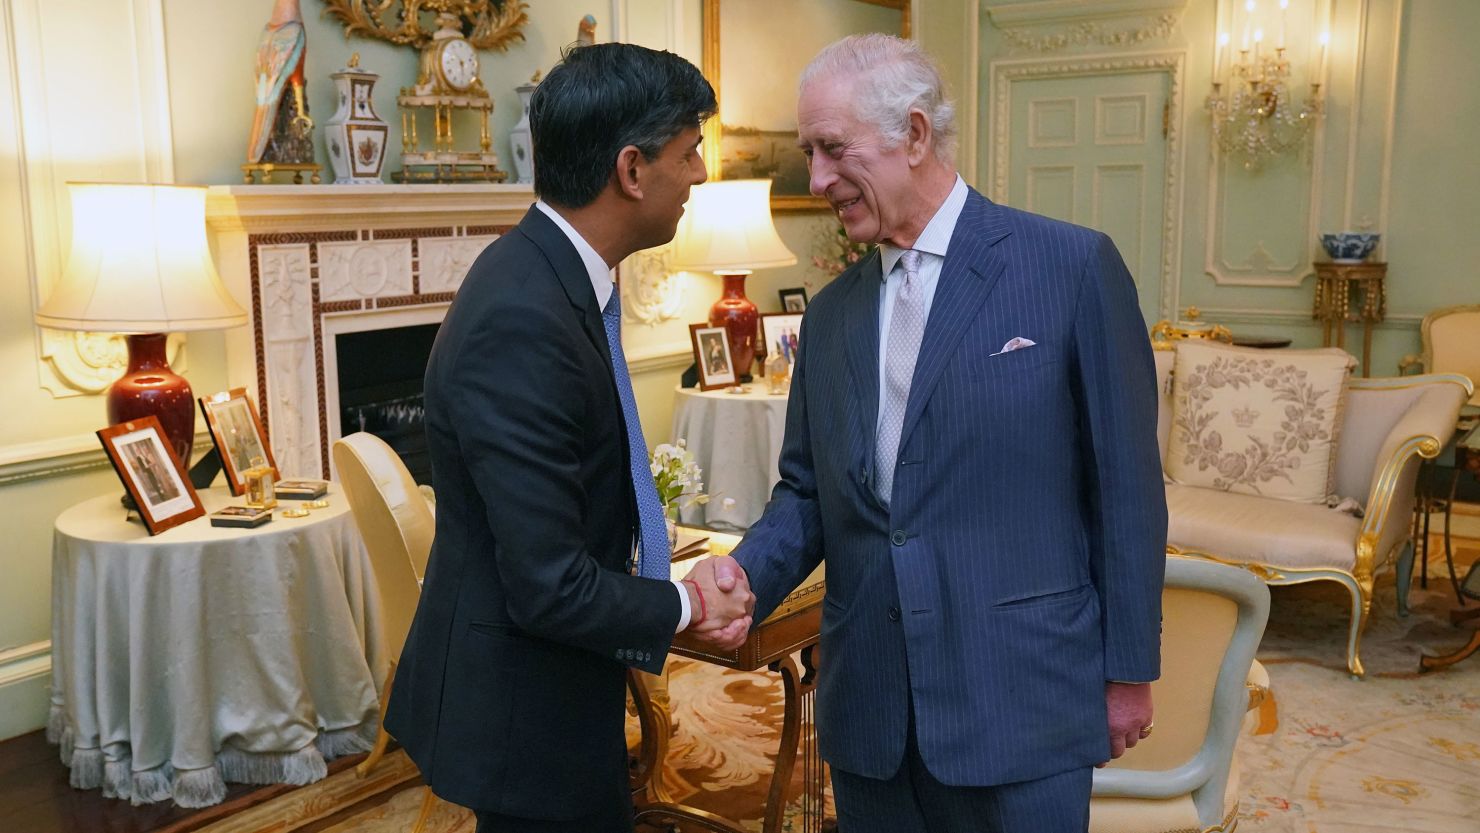 King Charles III meets with British Prime Minister Rishi Sunak at Buckingham Palace in London on February 21 for their first in-person audience since the King's cancer diagnosis.